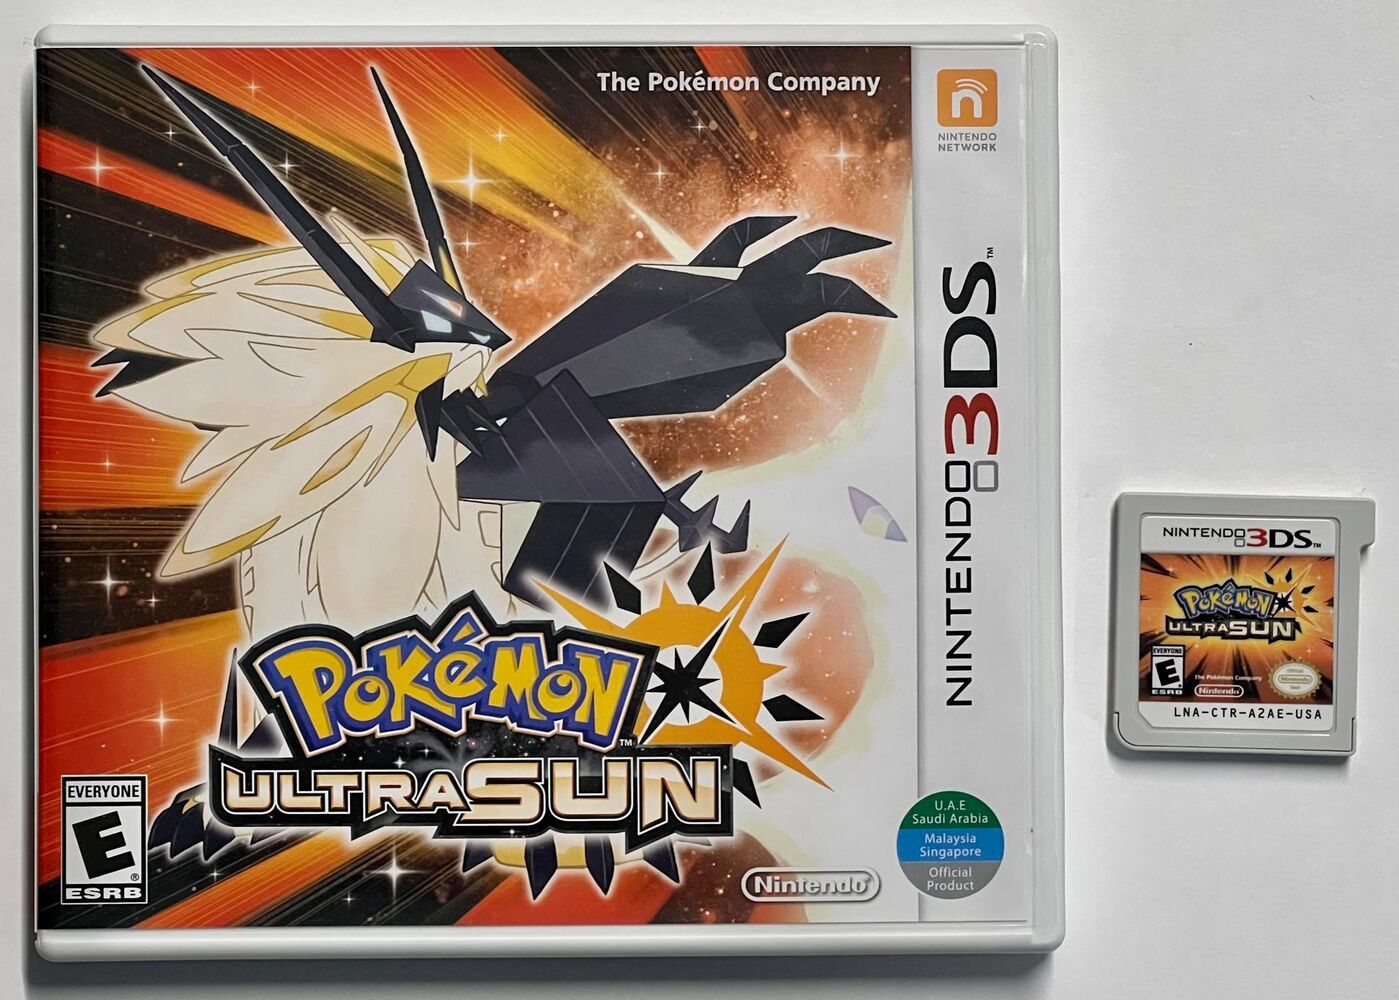 Pokemon: Ultra Sun for Nintendo 3DS Case And Game TESTED AND WORKS